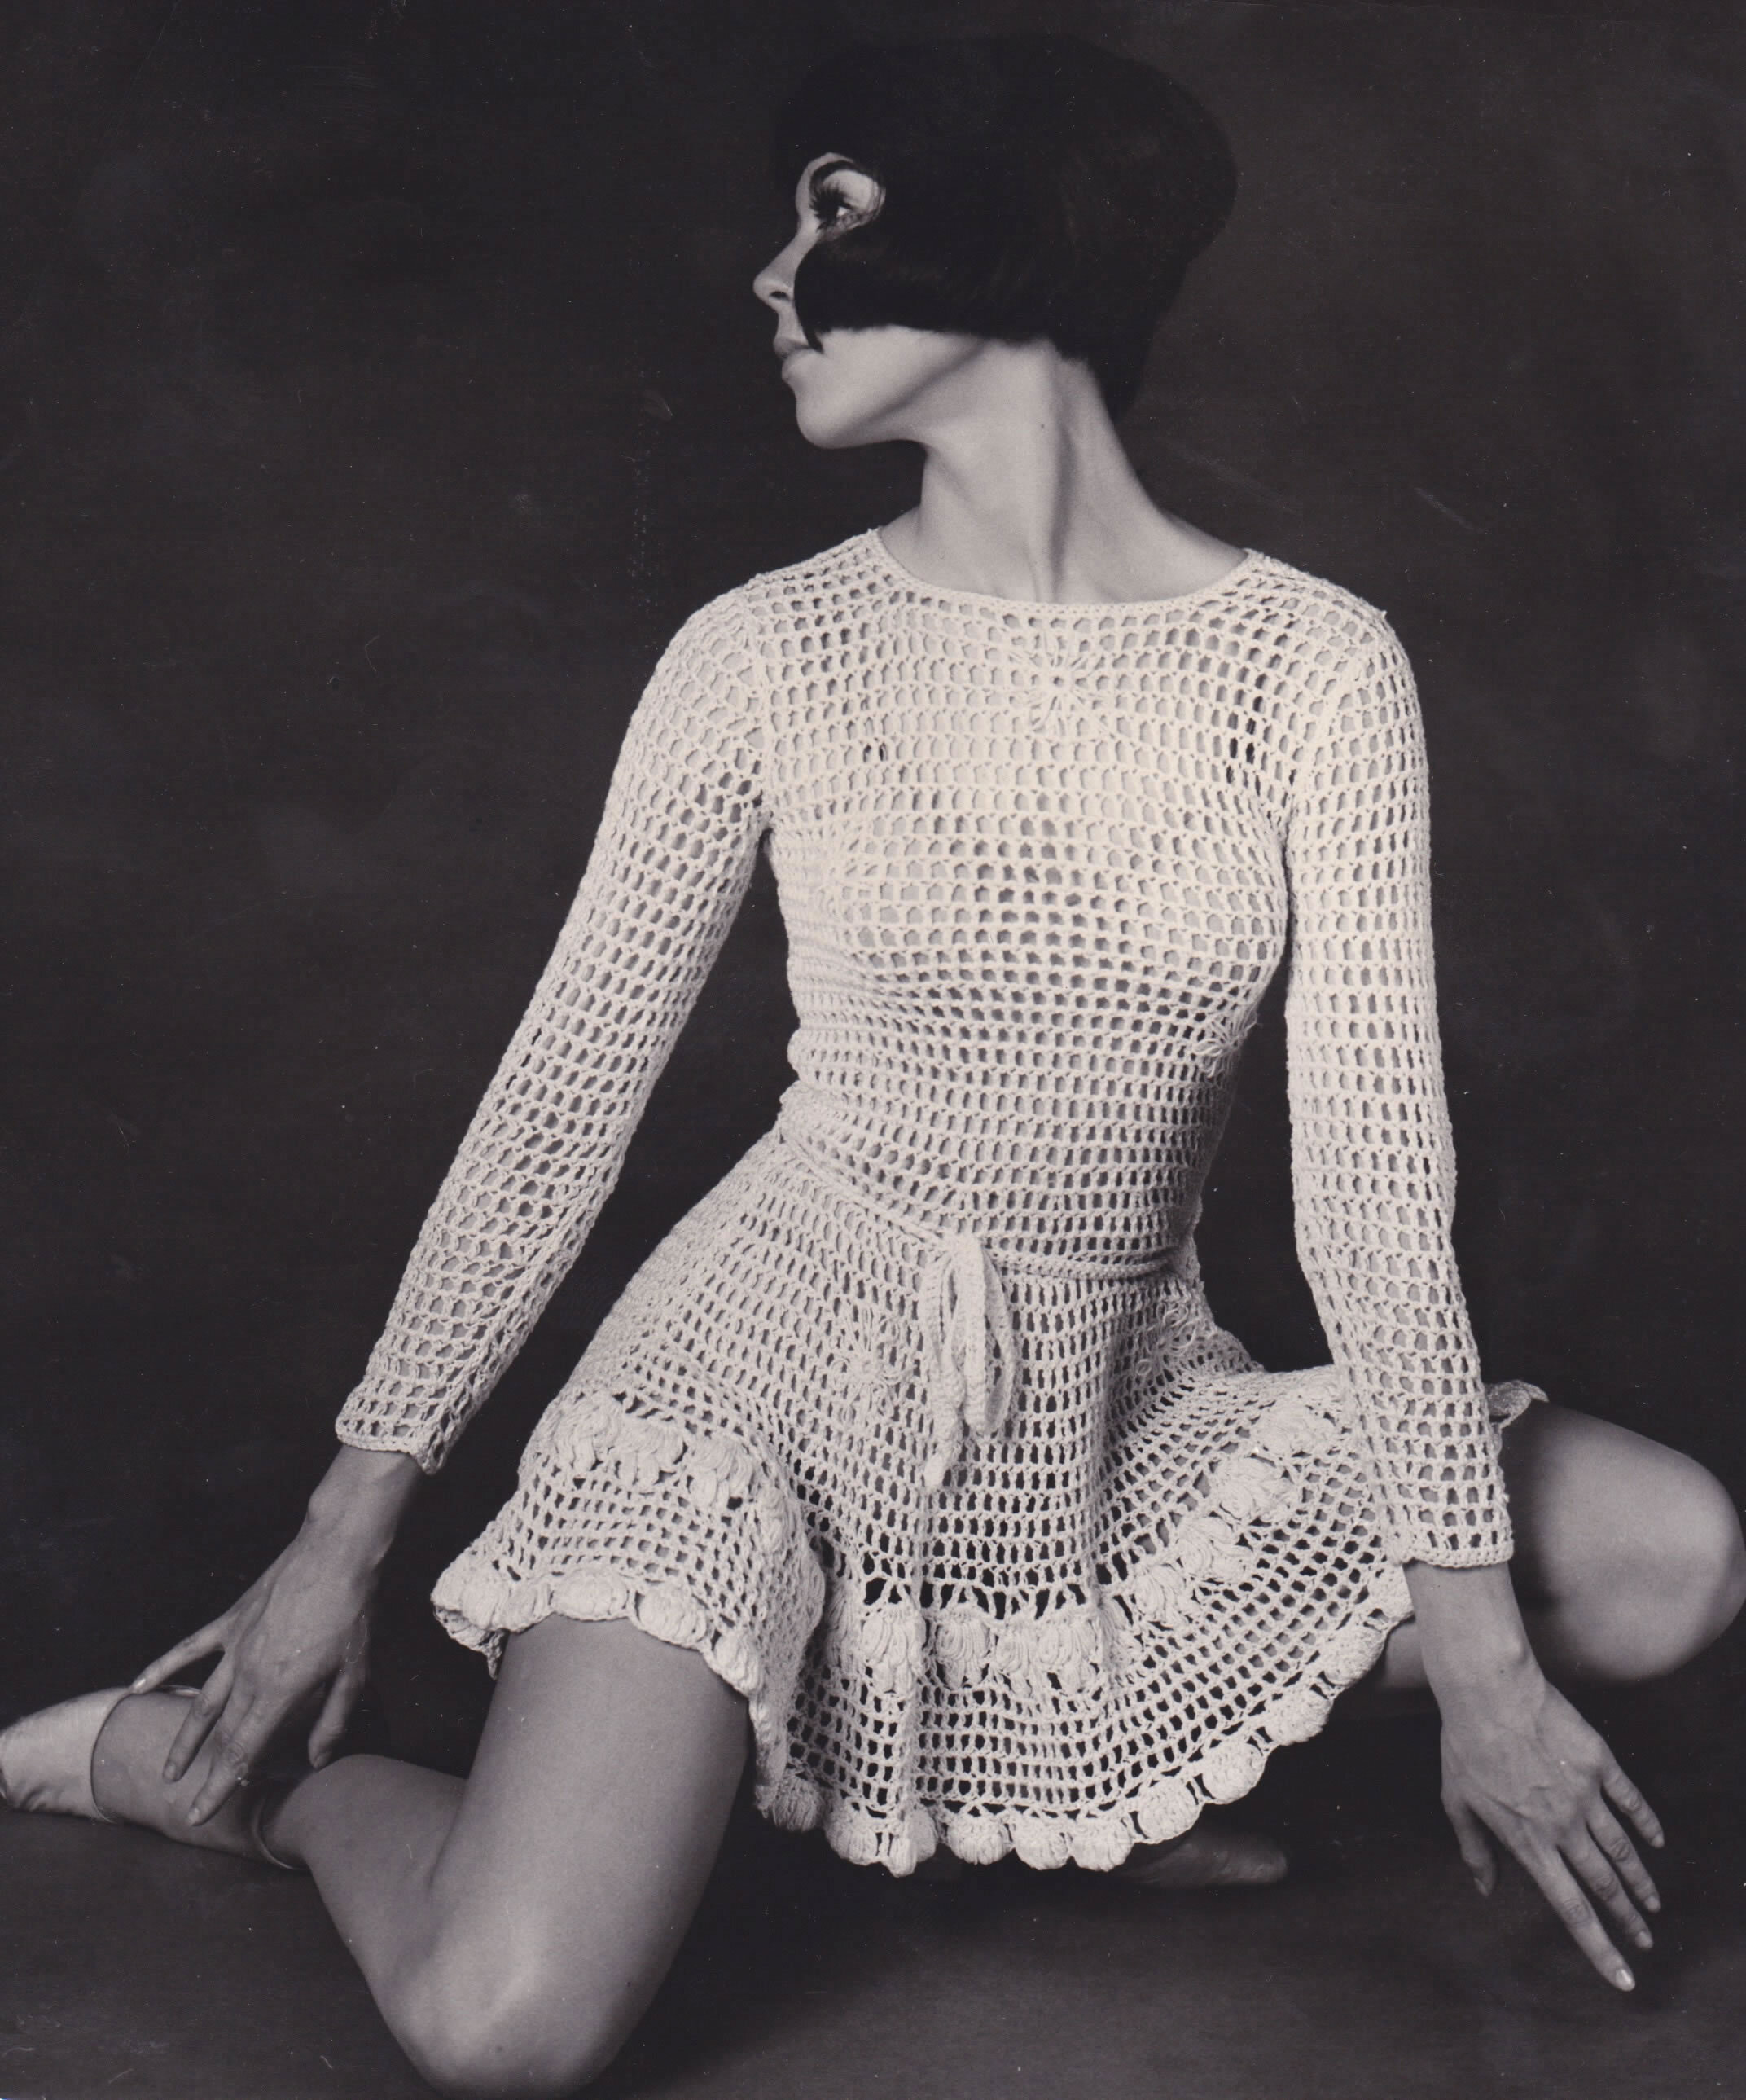 The see through Mini Dress, made of lace or crochet, that Vicky Tiel made to wear while working at the Cafe Wha and which she began selling while still in school.